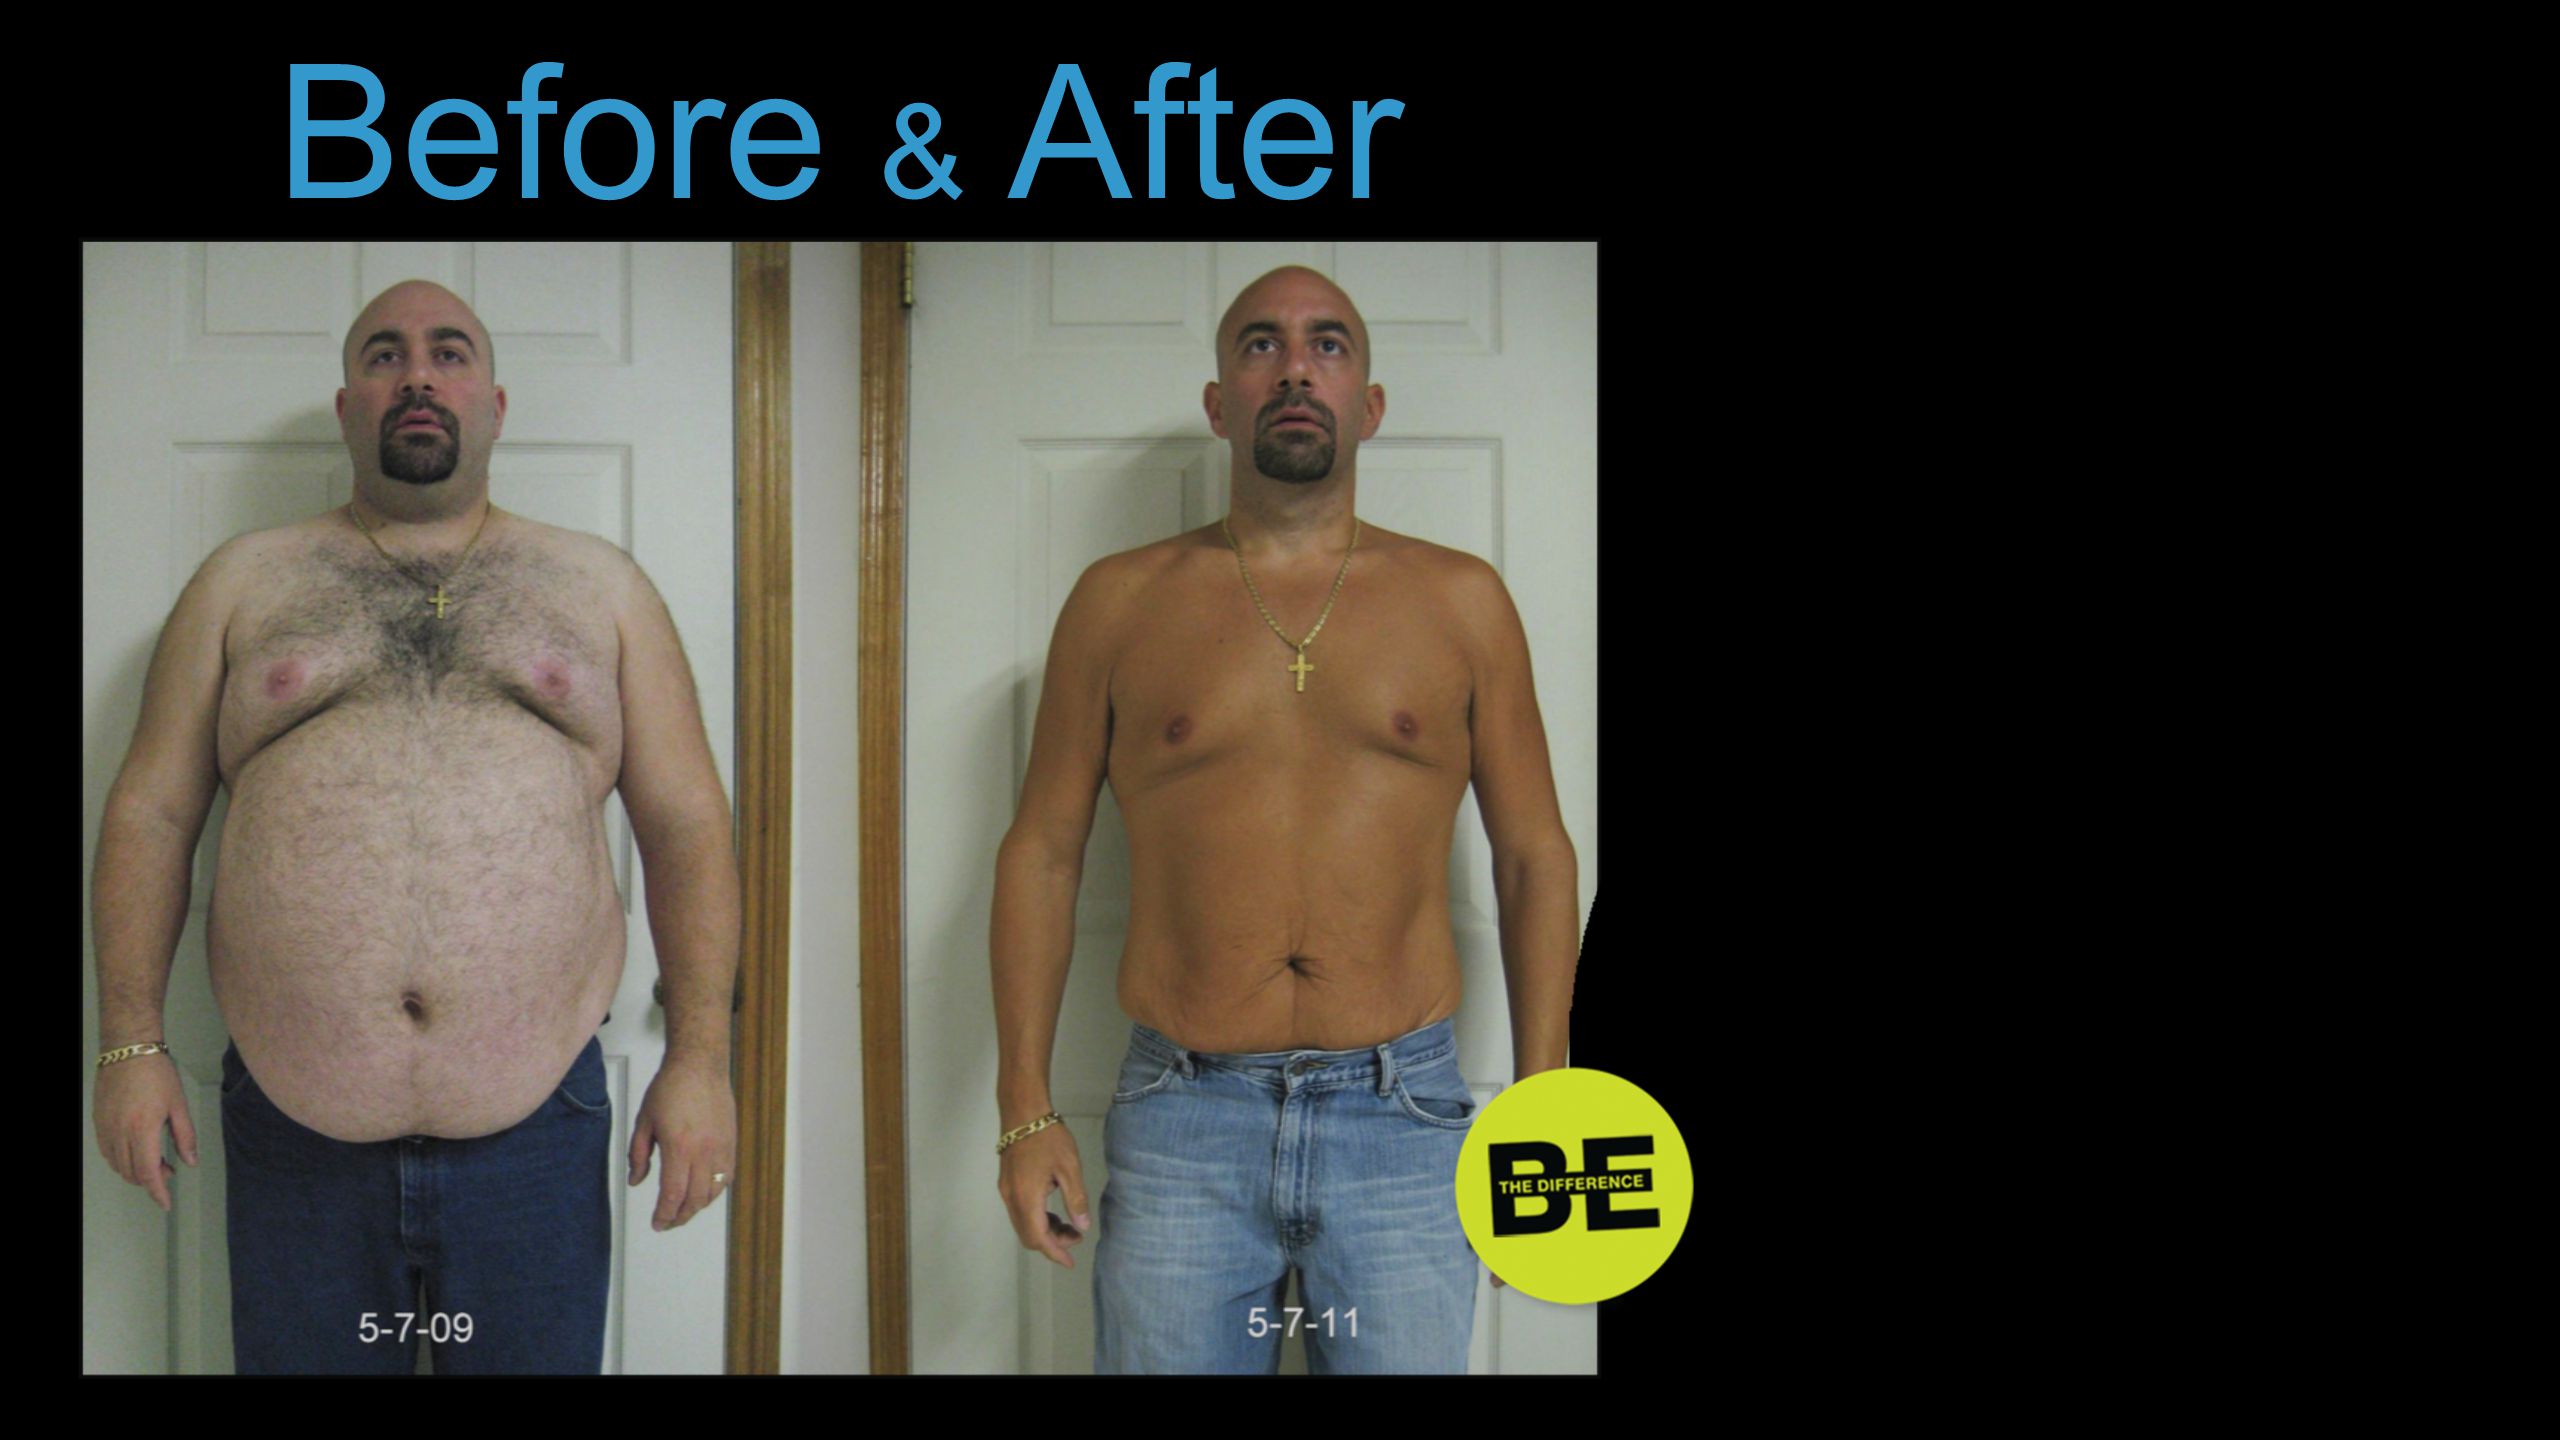 Before & After … or lost weight.